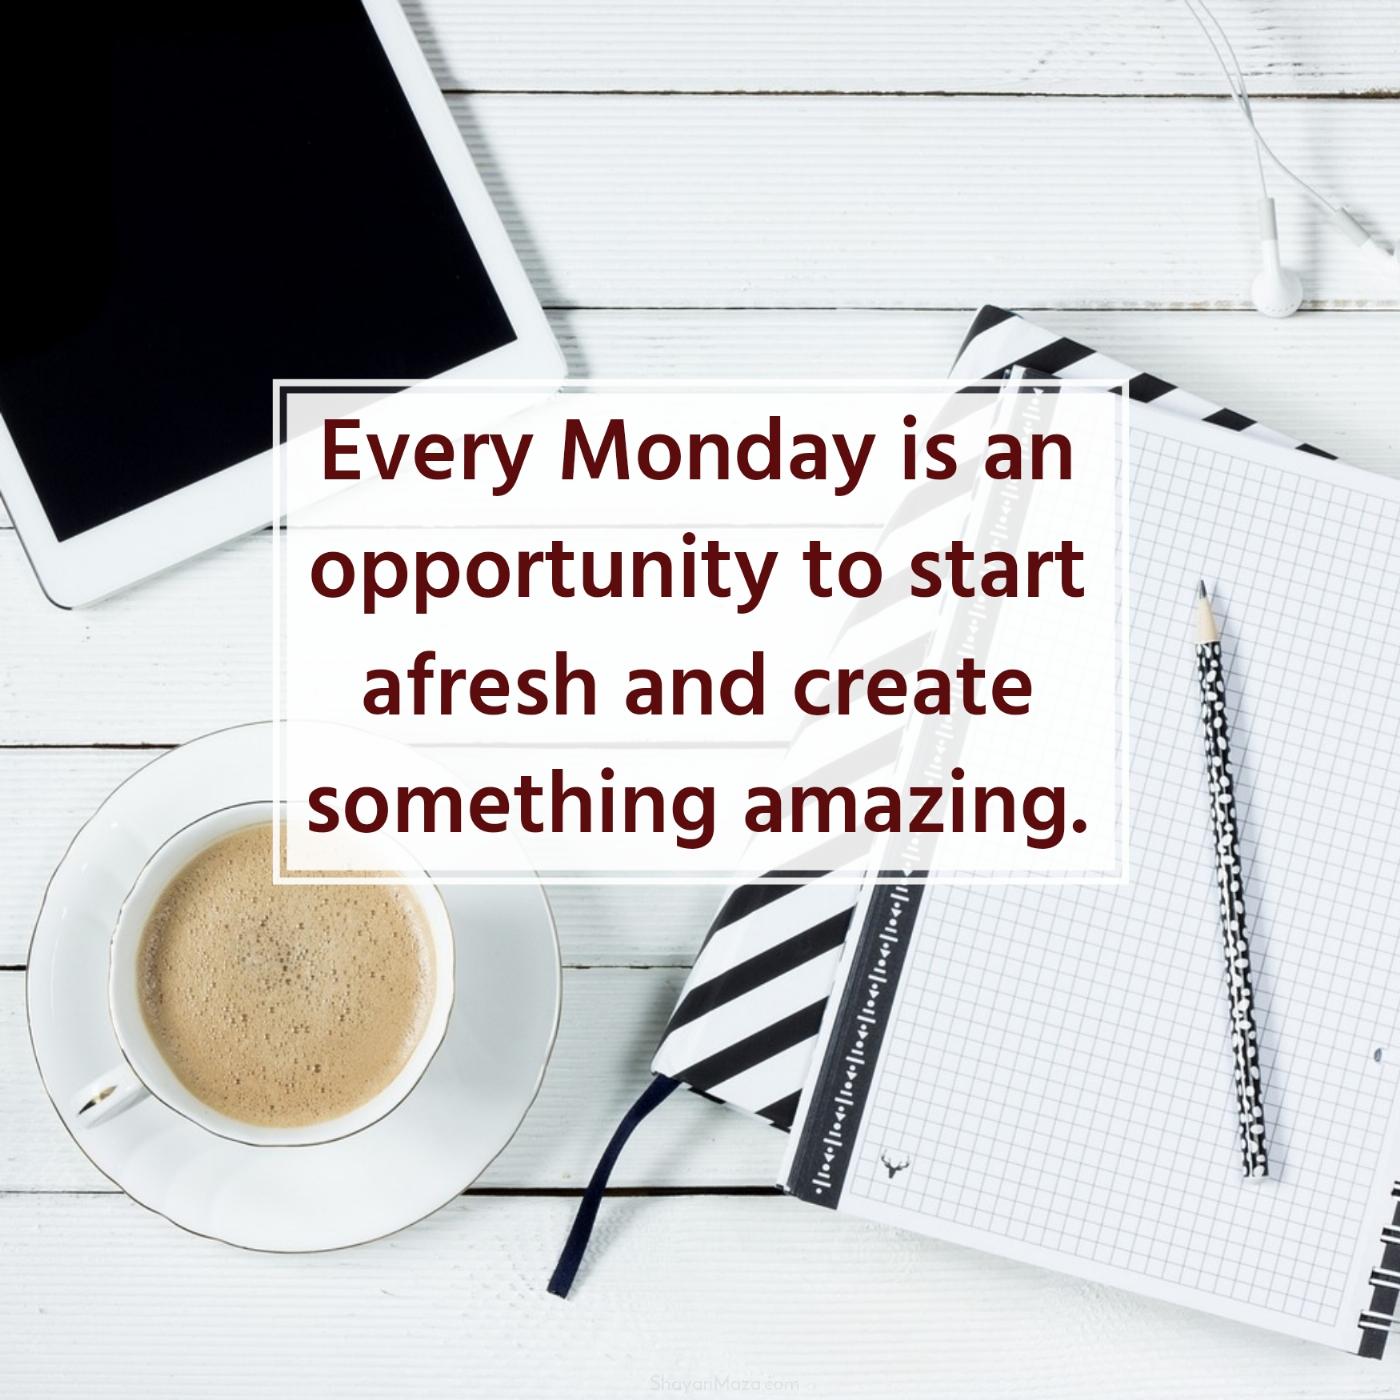 Every Monday is an opportunity to start afresh